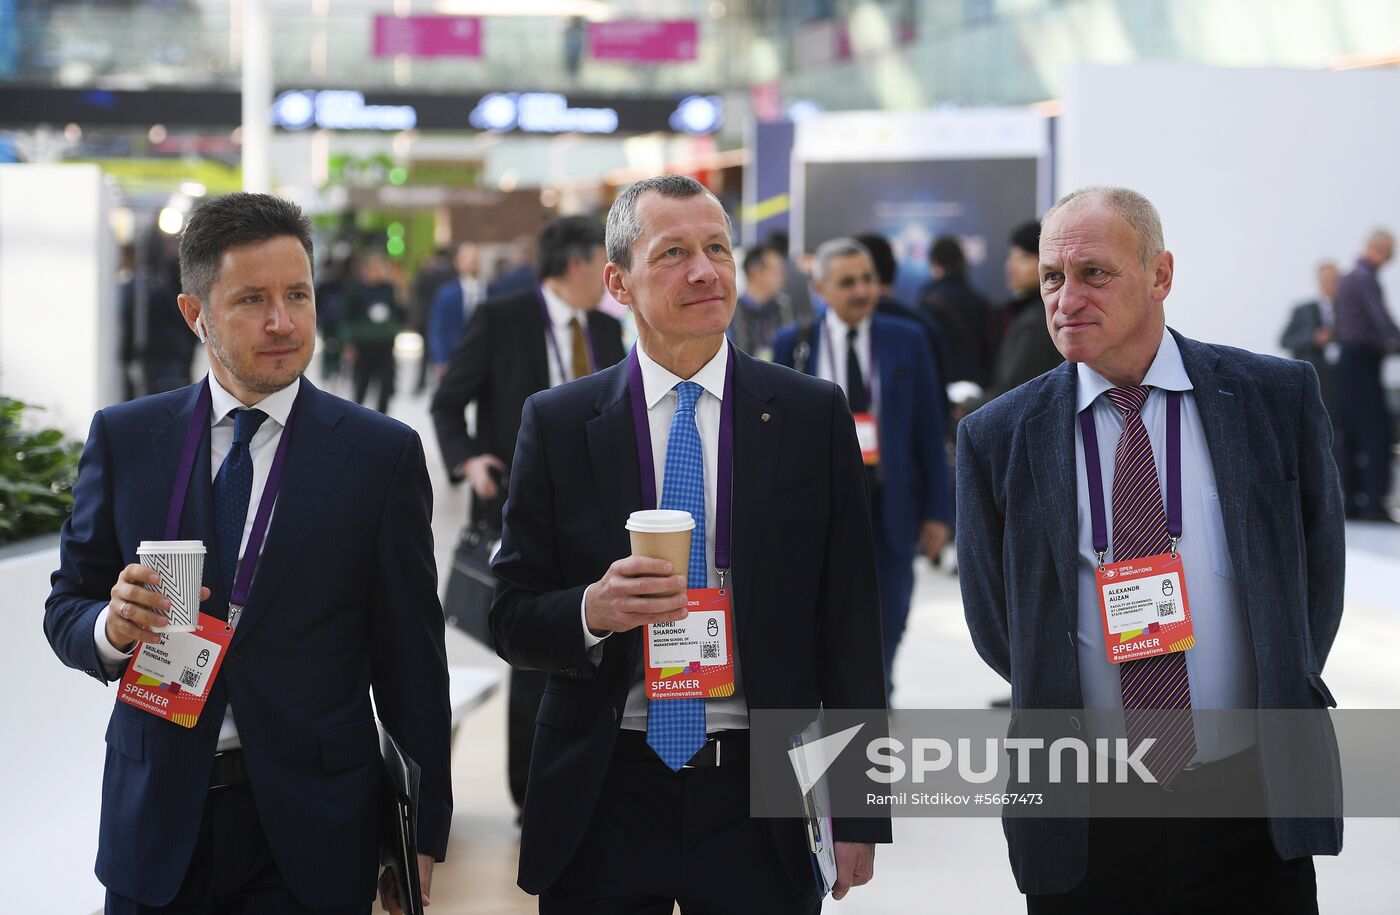 Russia Open Innovations Forum